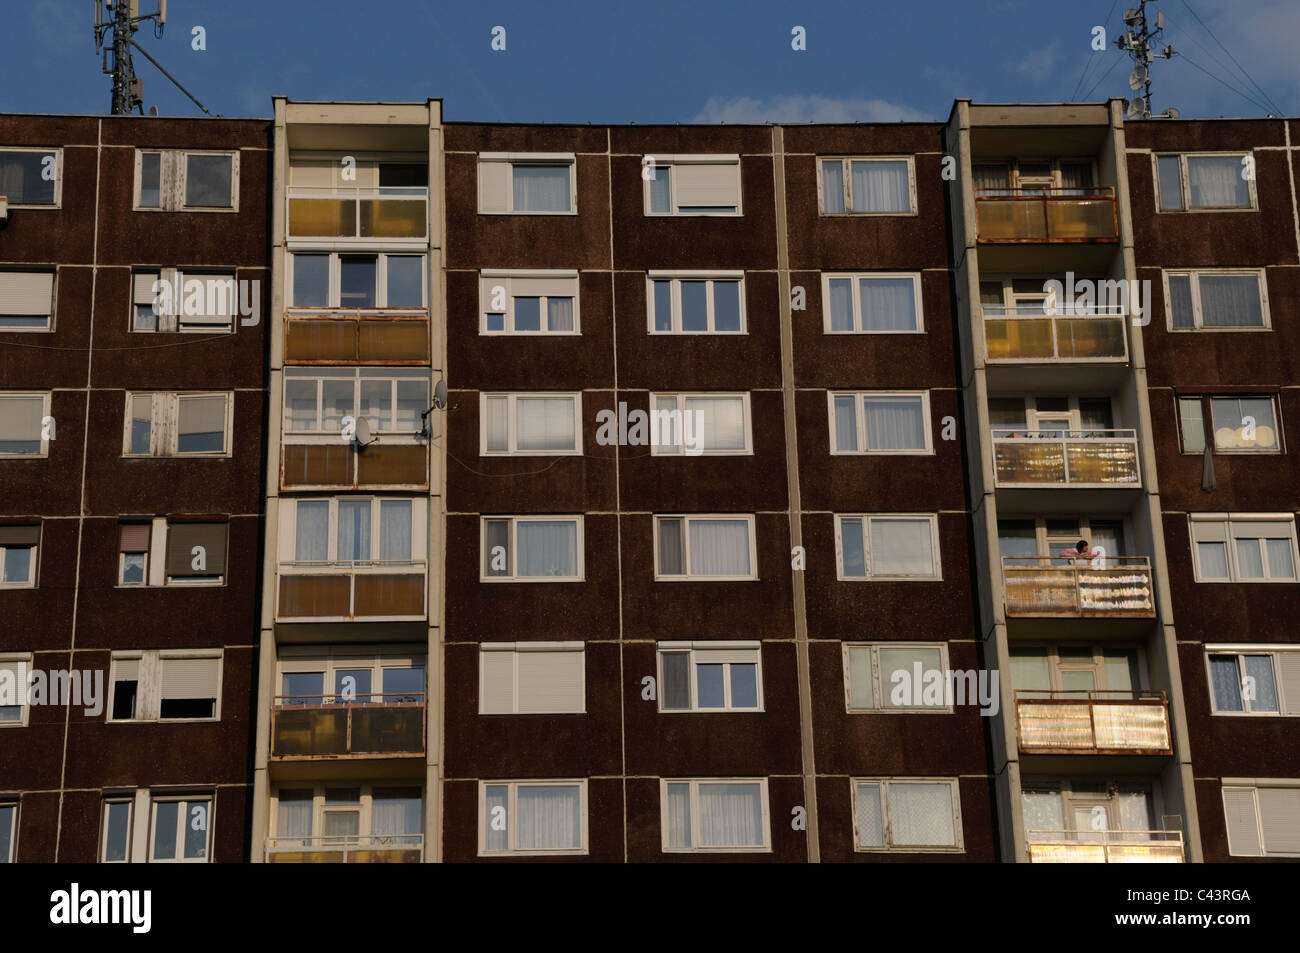 Eastern Bloc style residential apartment blocks in Hungary. Stock Photo